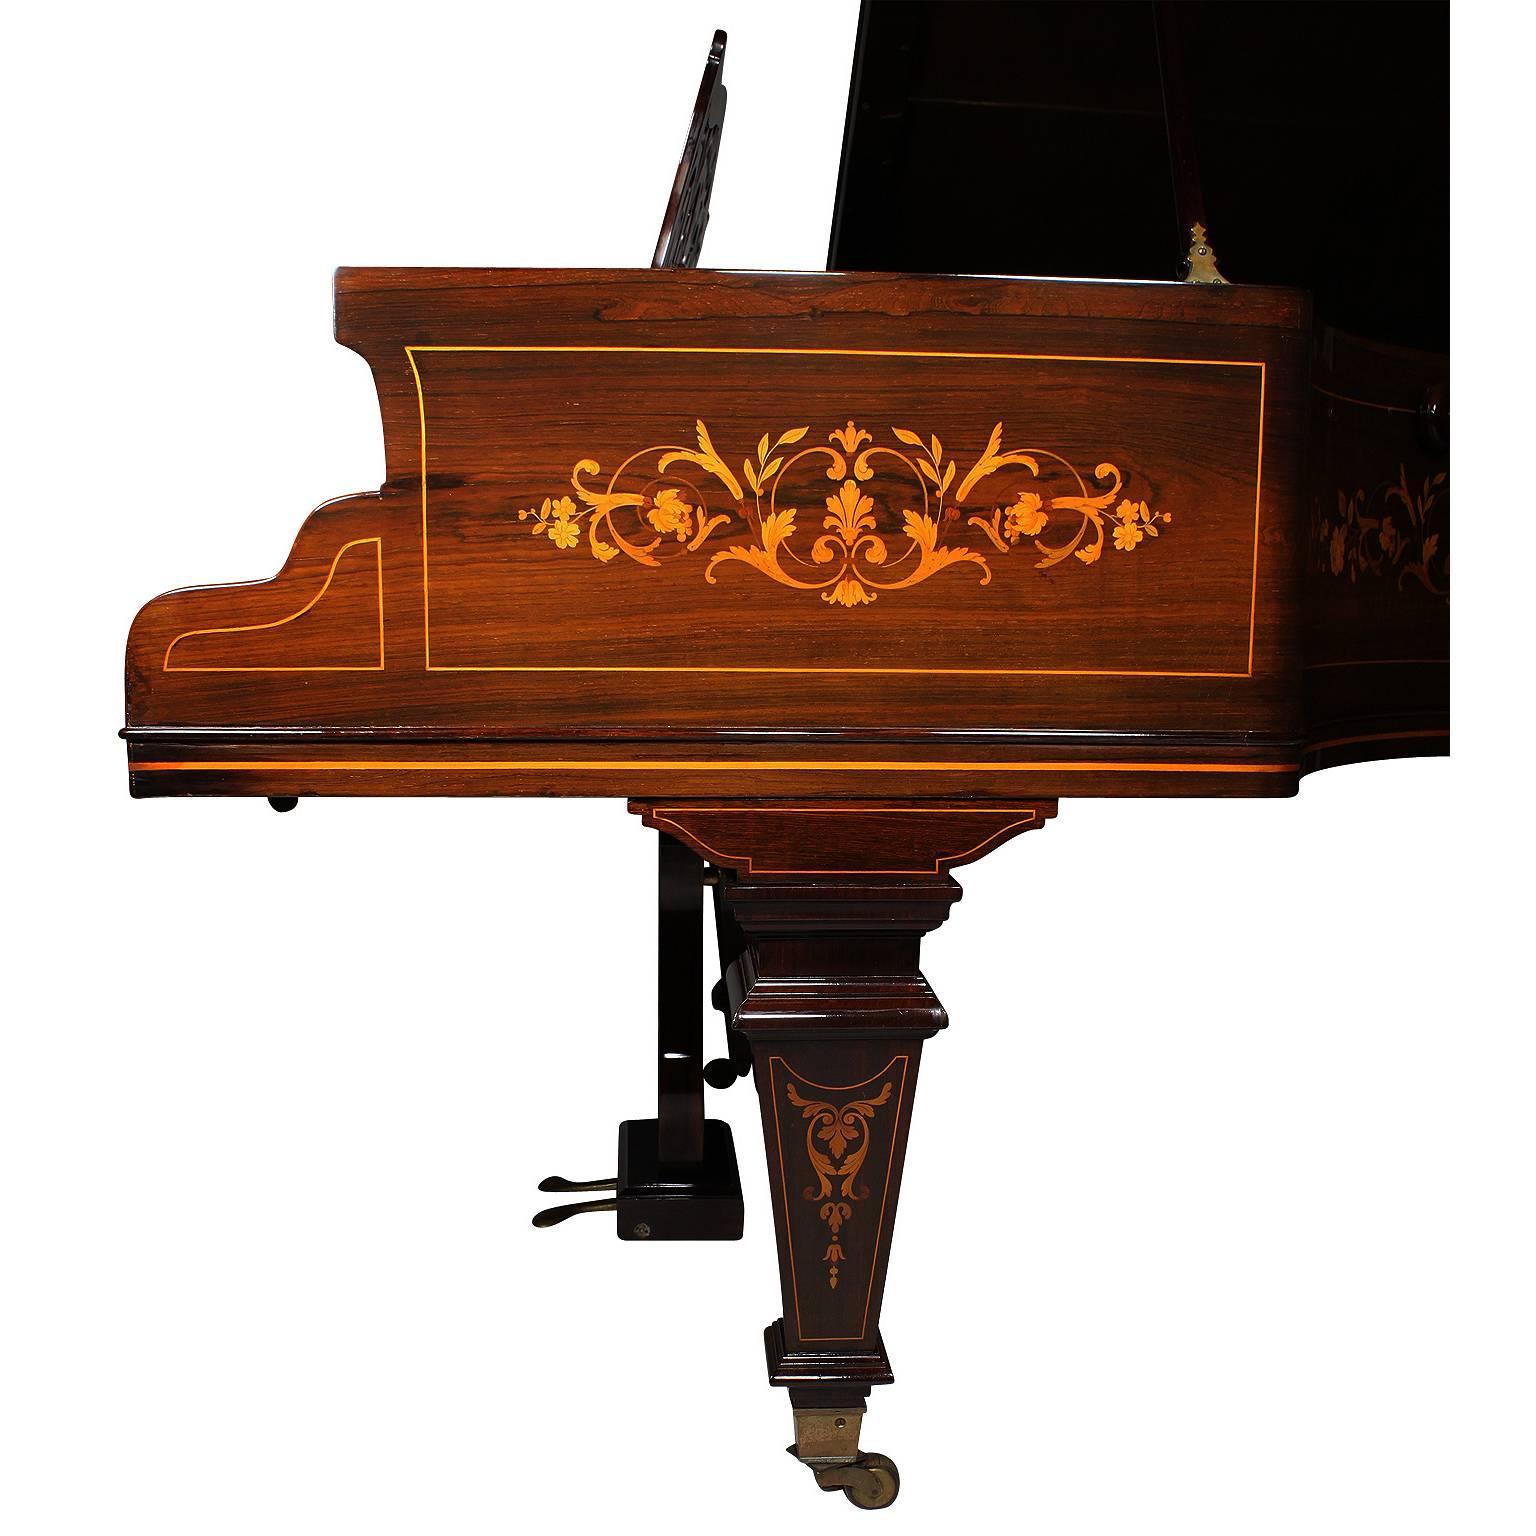 Neoclassical Revival 19th Century Louis XIV Style Marquetry Baby Grand Piano by Collard & Collard For Sale